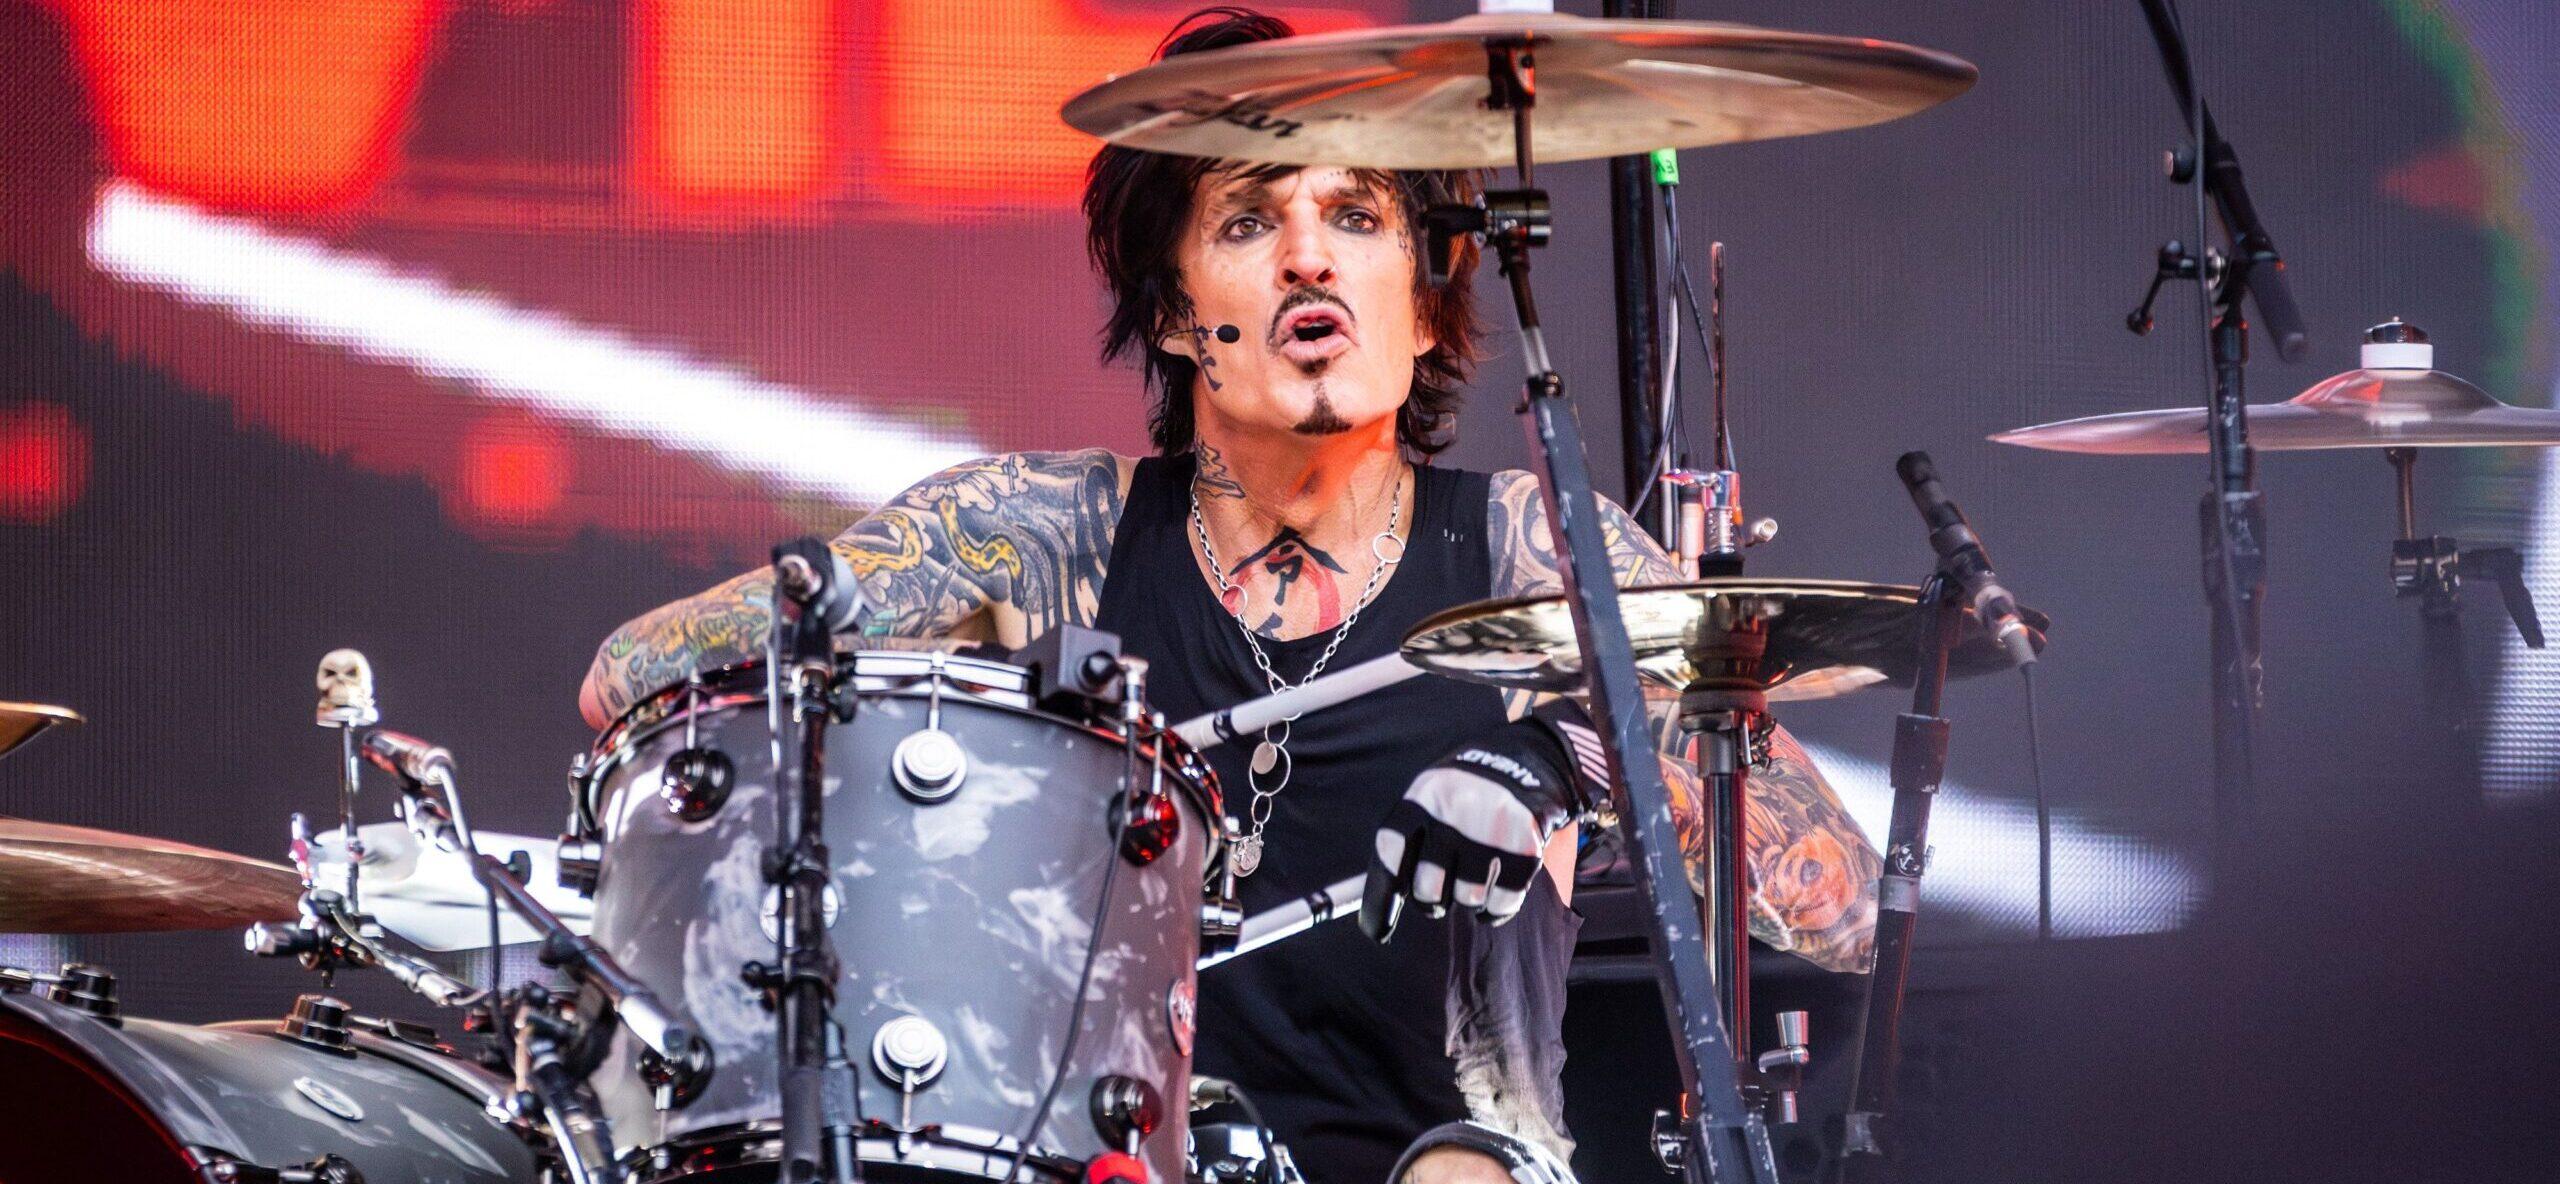 ‘Motley Crue’ Drummer Tommy Lee Sued For Sexual Assault